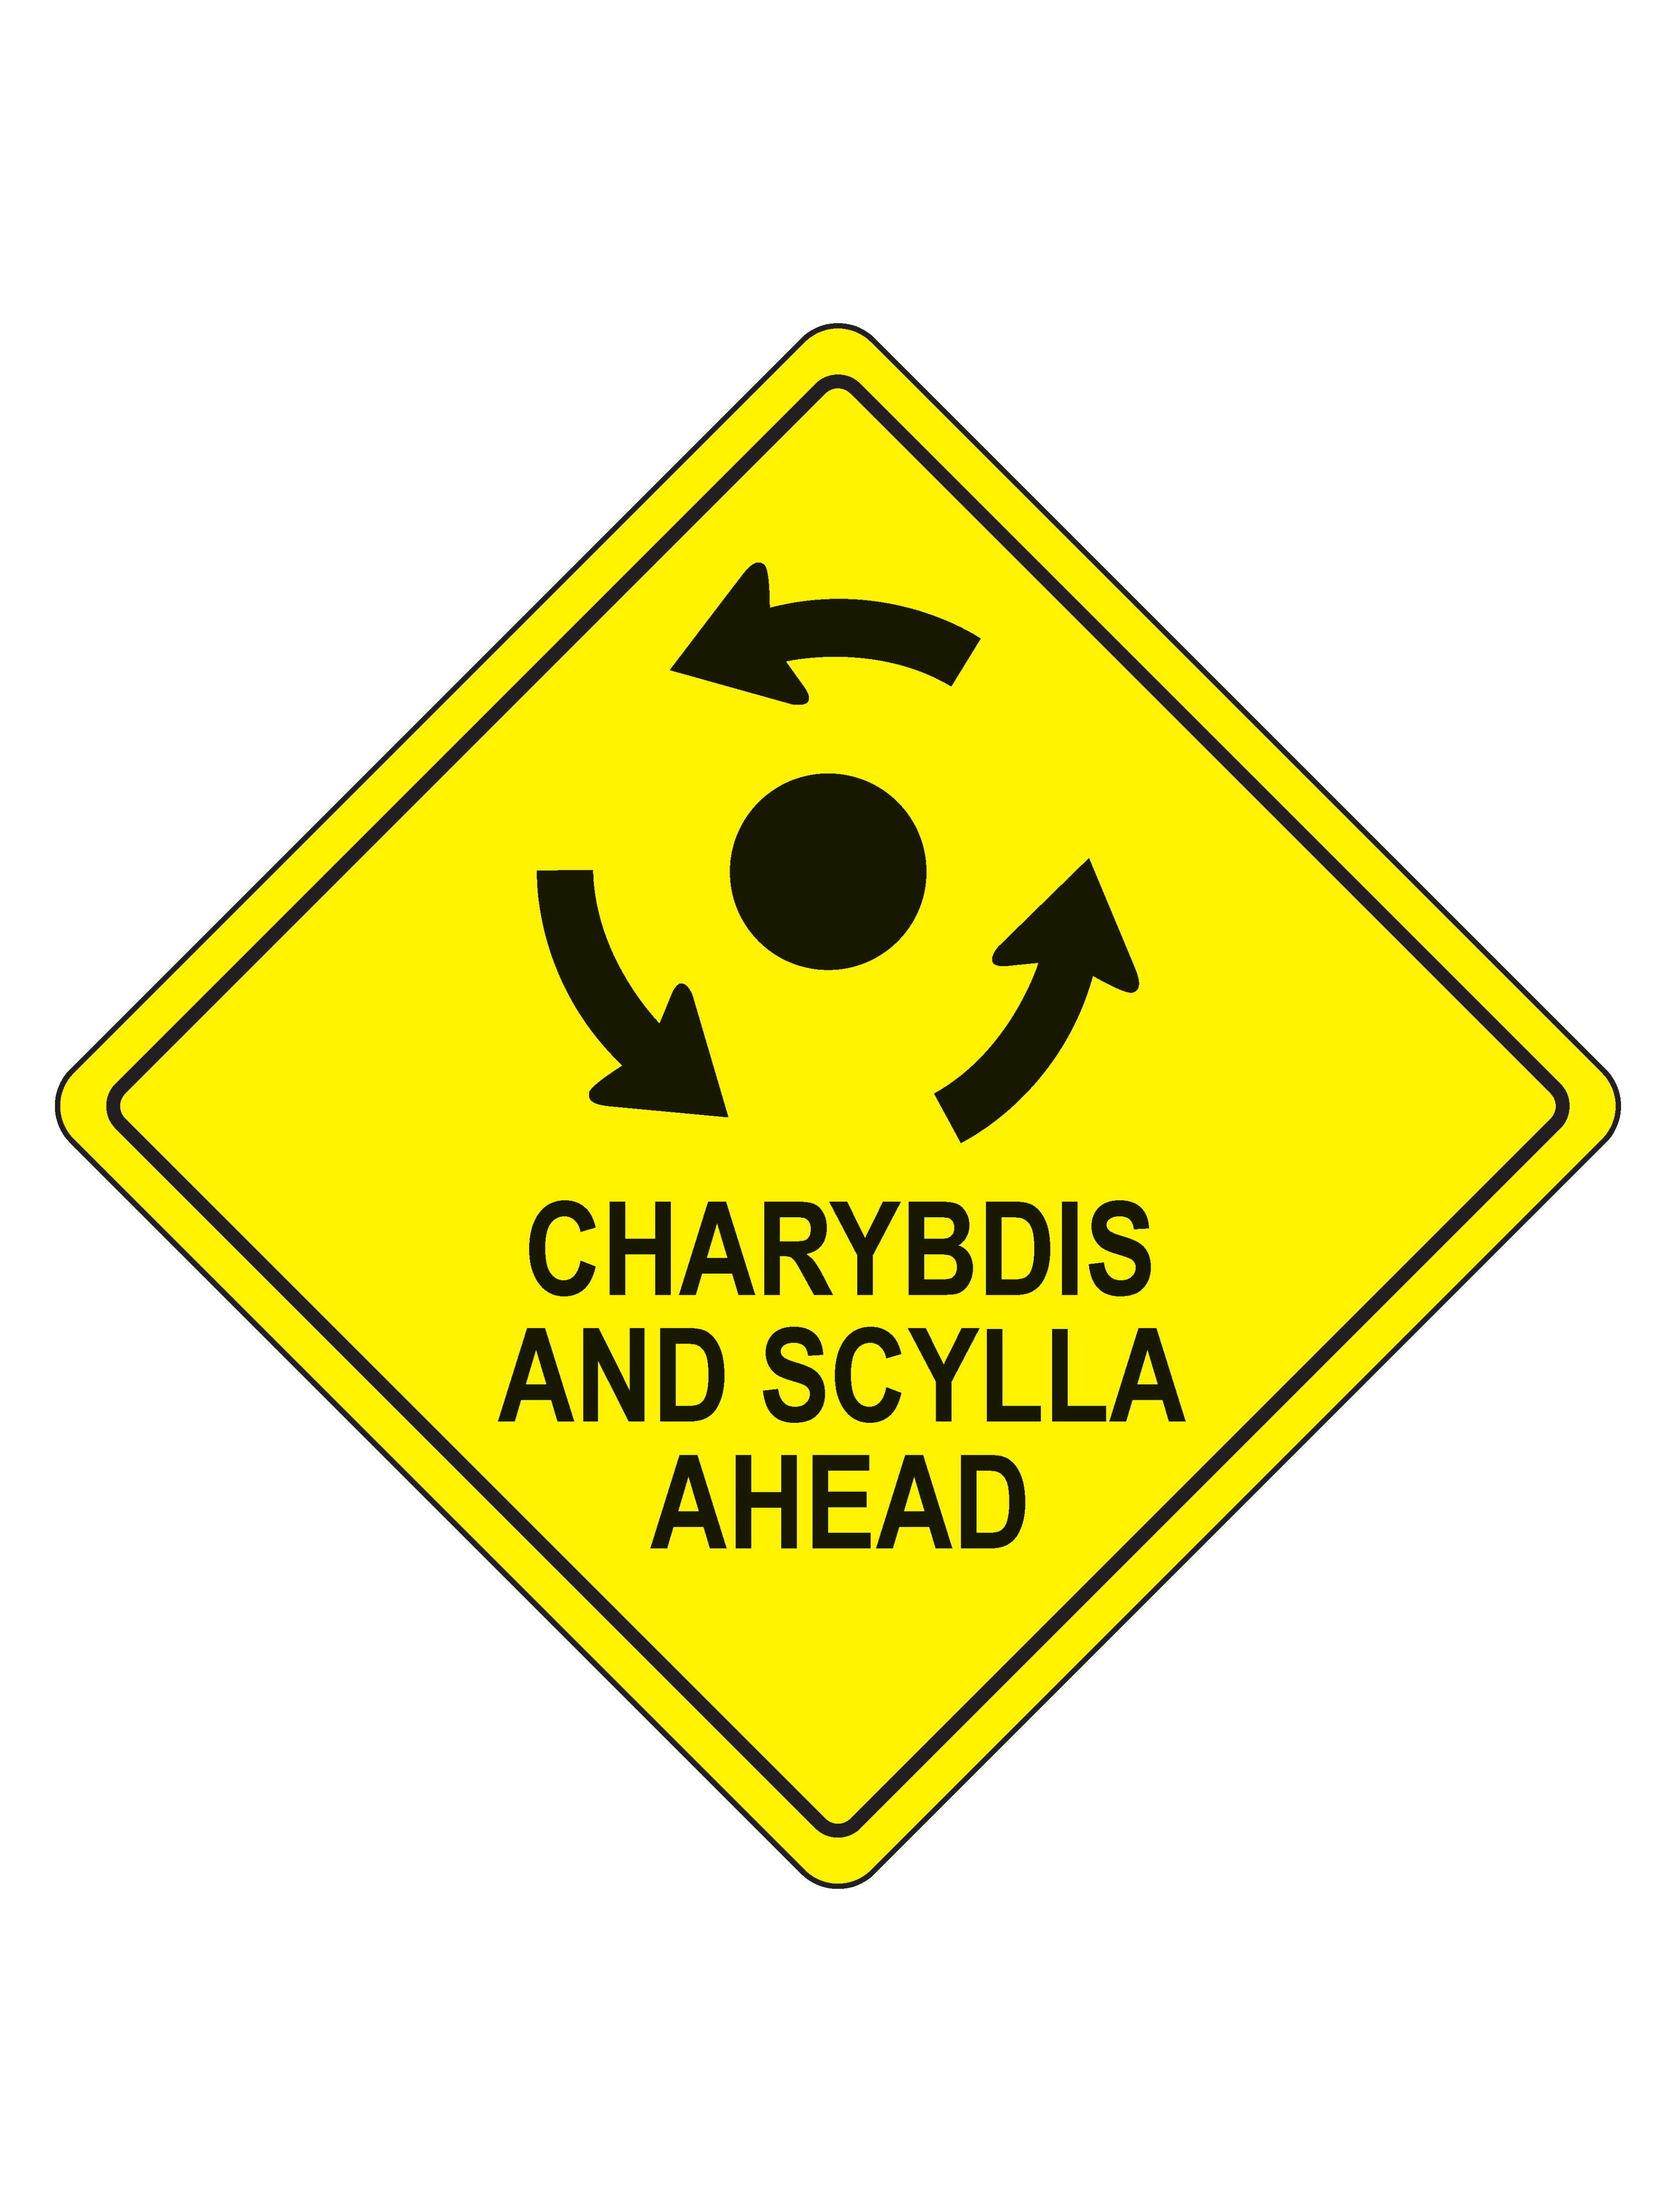 A yellow caution diamond with a roundabout symbold and the words Charybdis and Scylla Ahead